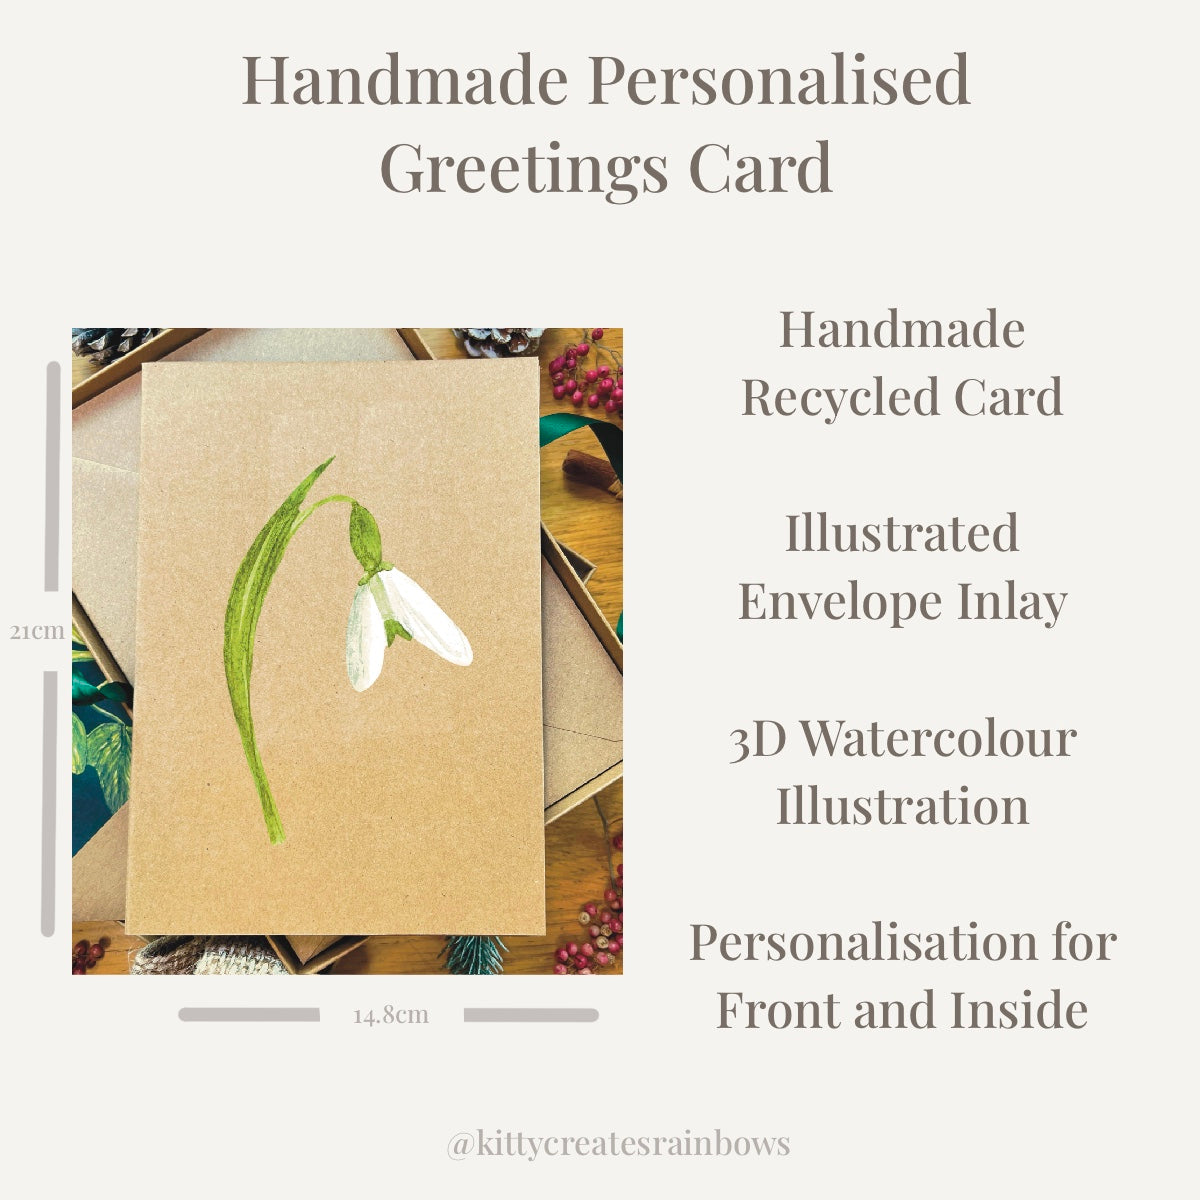 Snowdrop infographic for greetings card 